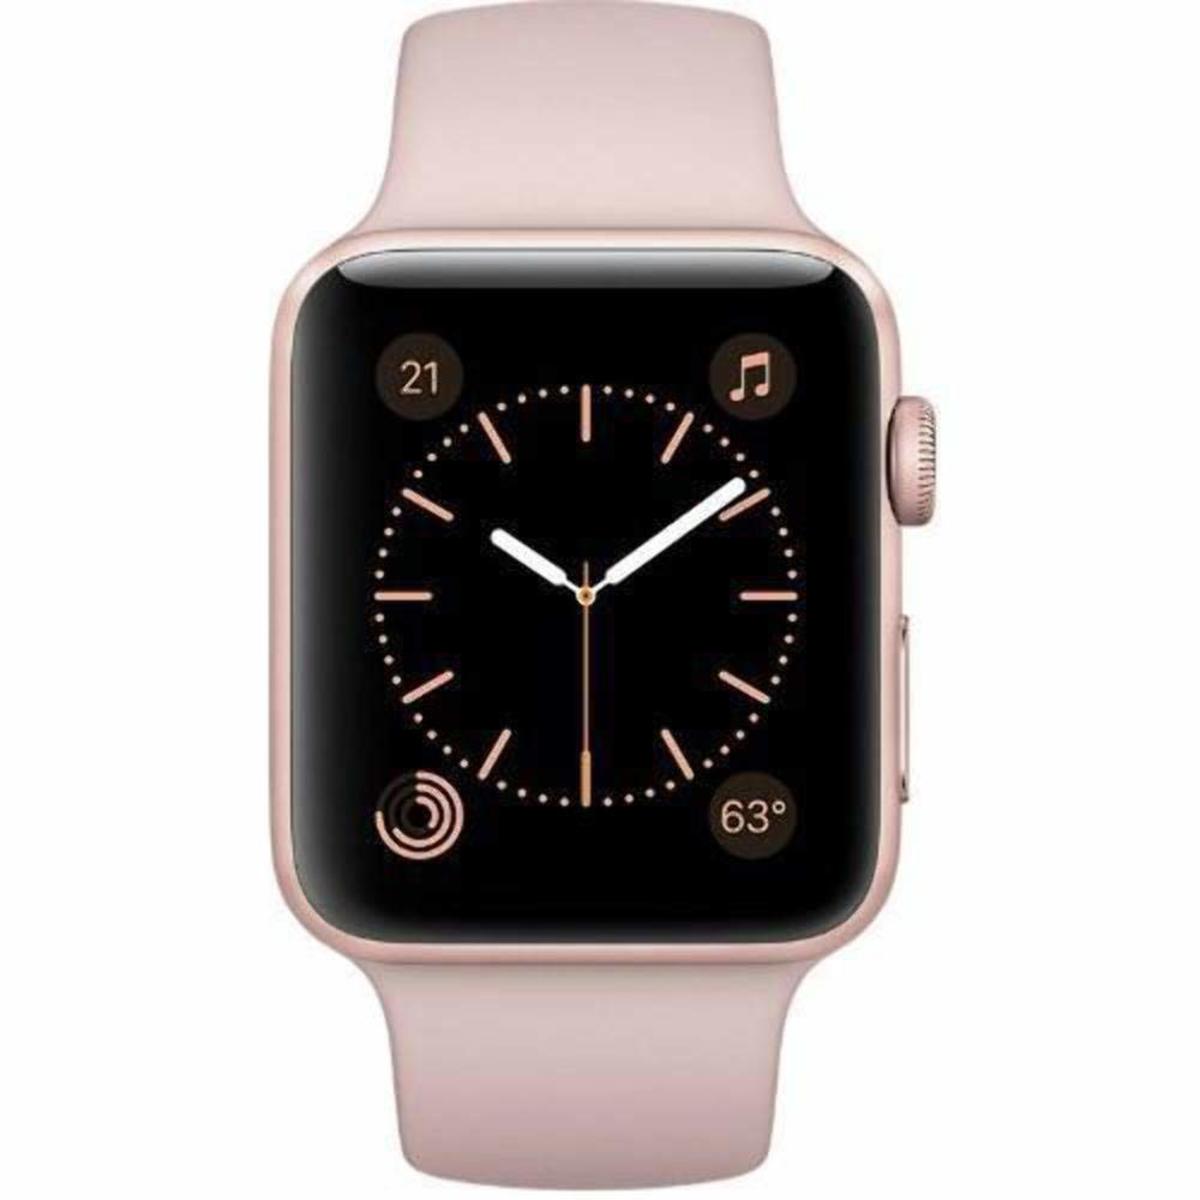 Apple Watch Series 2 MQ142 42mm Rose Gold Aluminum Case with Pink Sand Sport Band